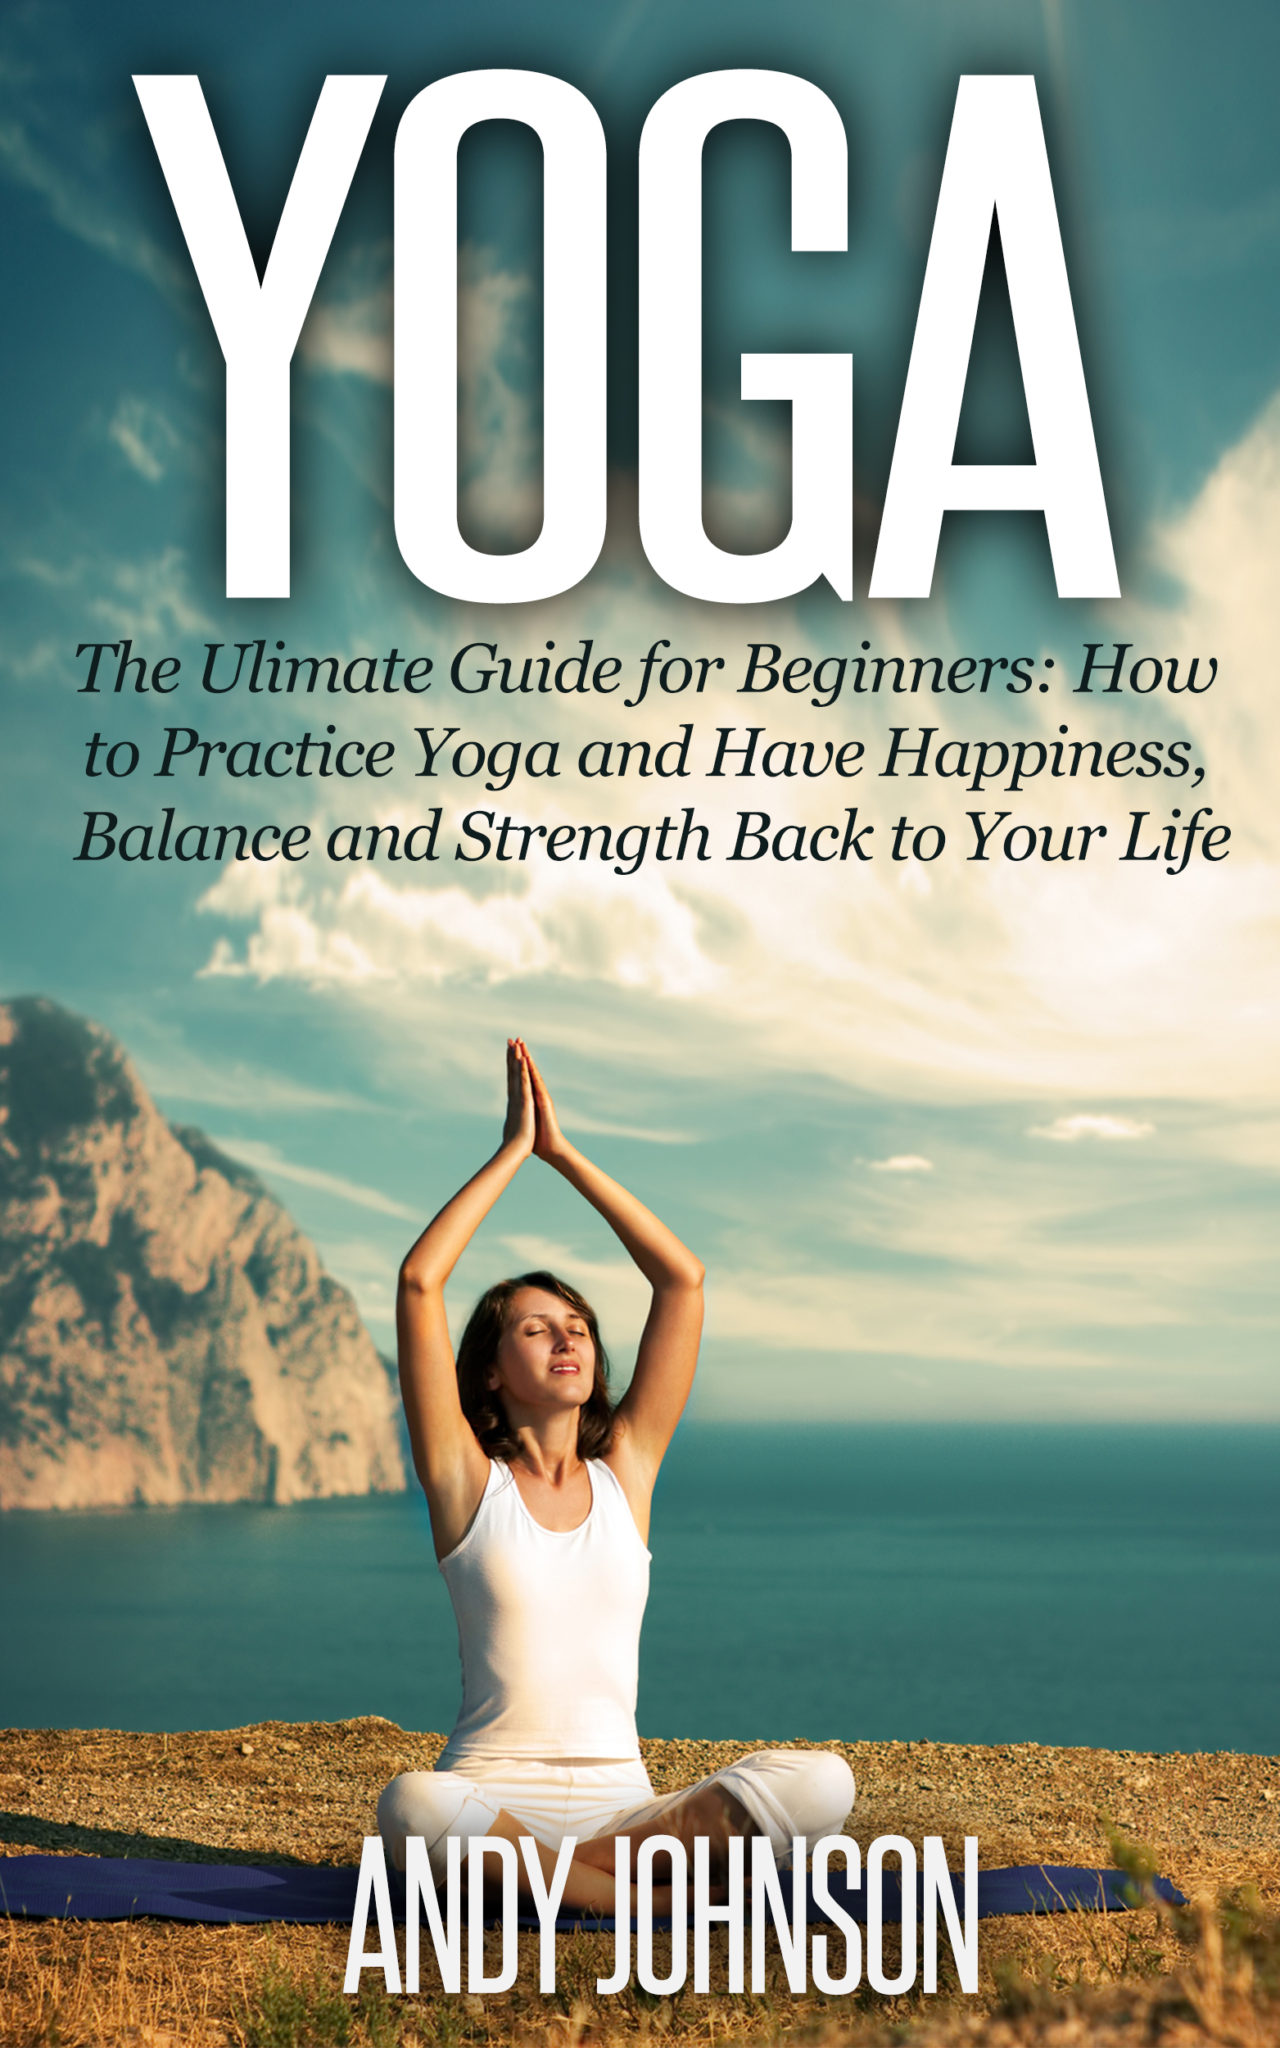 Yoga: The Ultimate Guide for Beginners: How to Practice Yoga and Have Happiness, Balance and Strength Back to Your Life by Andy Johnson